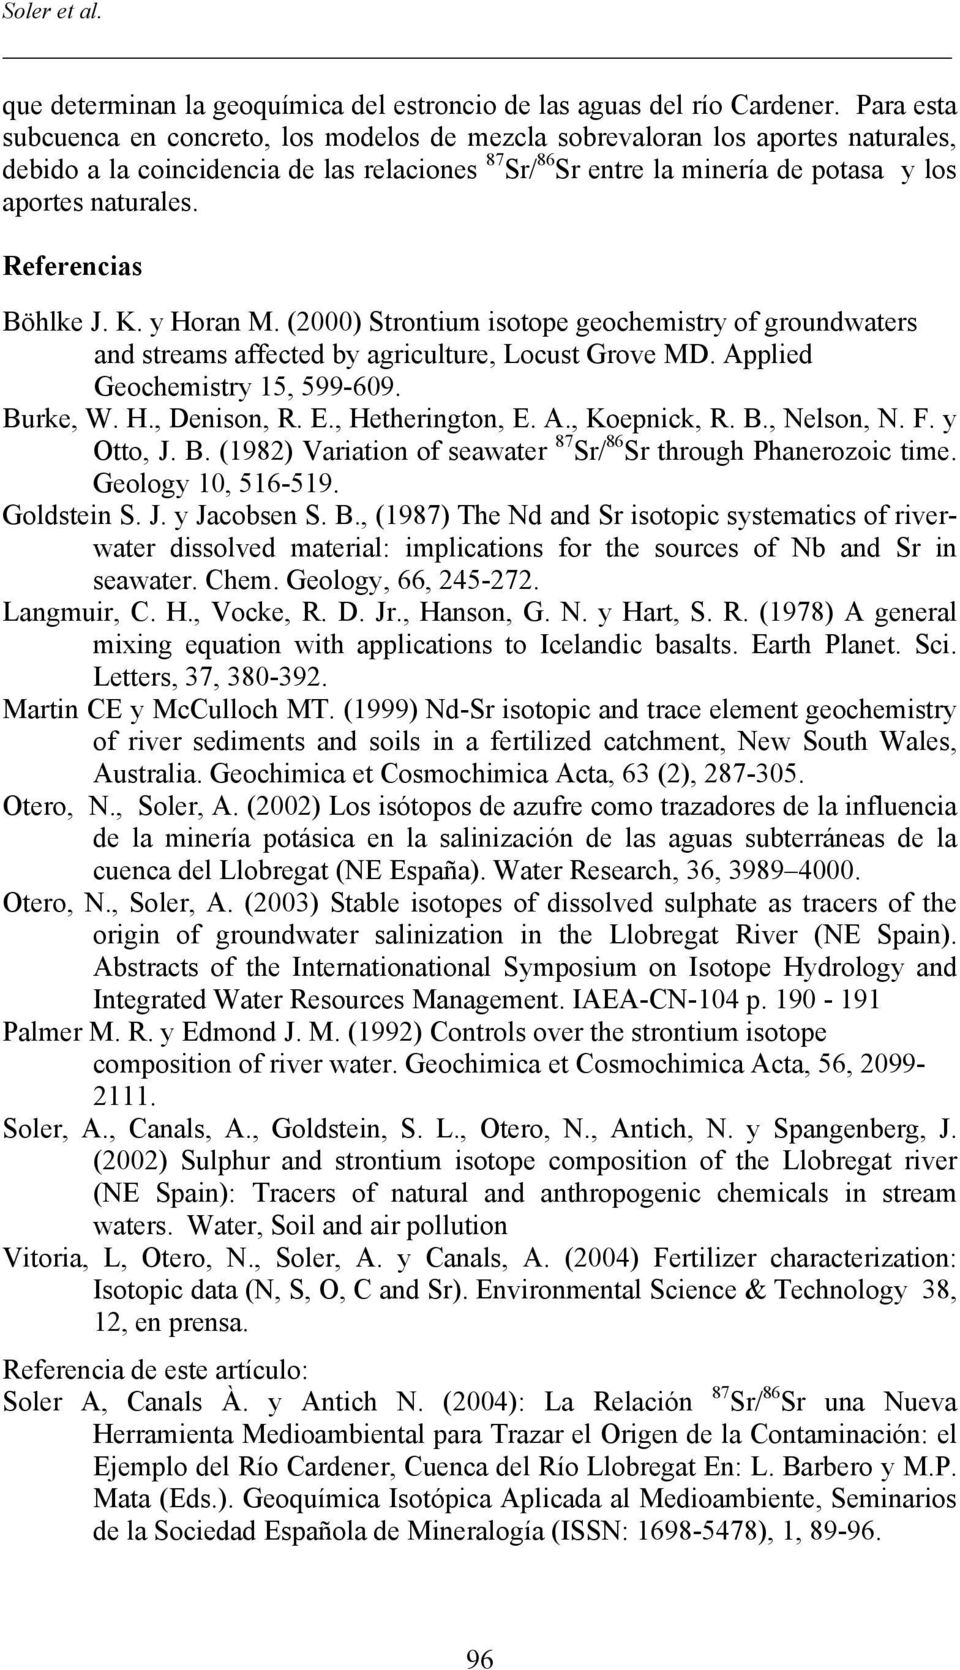 Referencias Böhlke J. K. y Horan M. (00) Strontium isotope geochemistry of groundwaters and streams affected by agriculture, Locust Grove MD. Applied Geochemistry 15, 599-609. Burke, W. H., Denison, R.